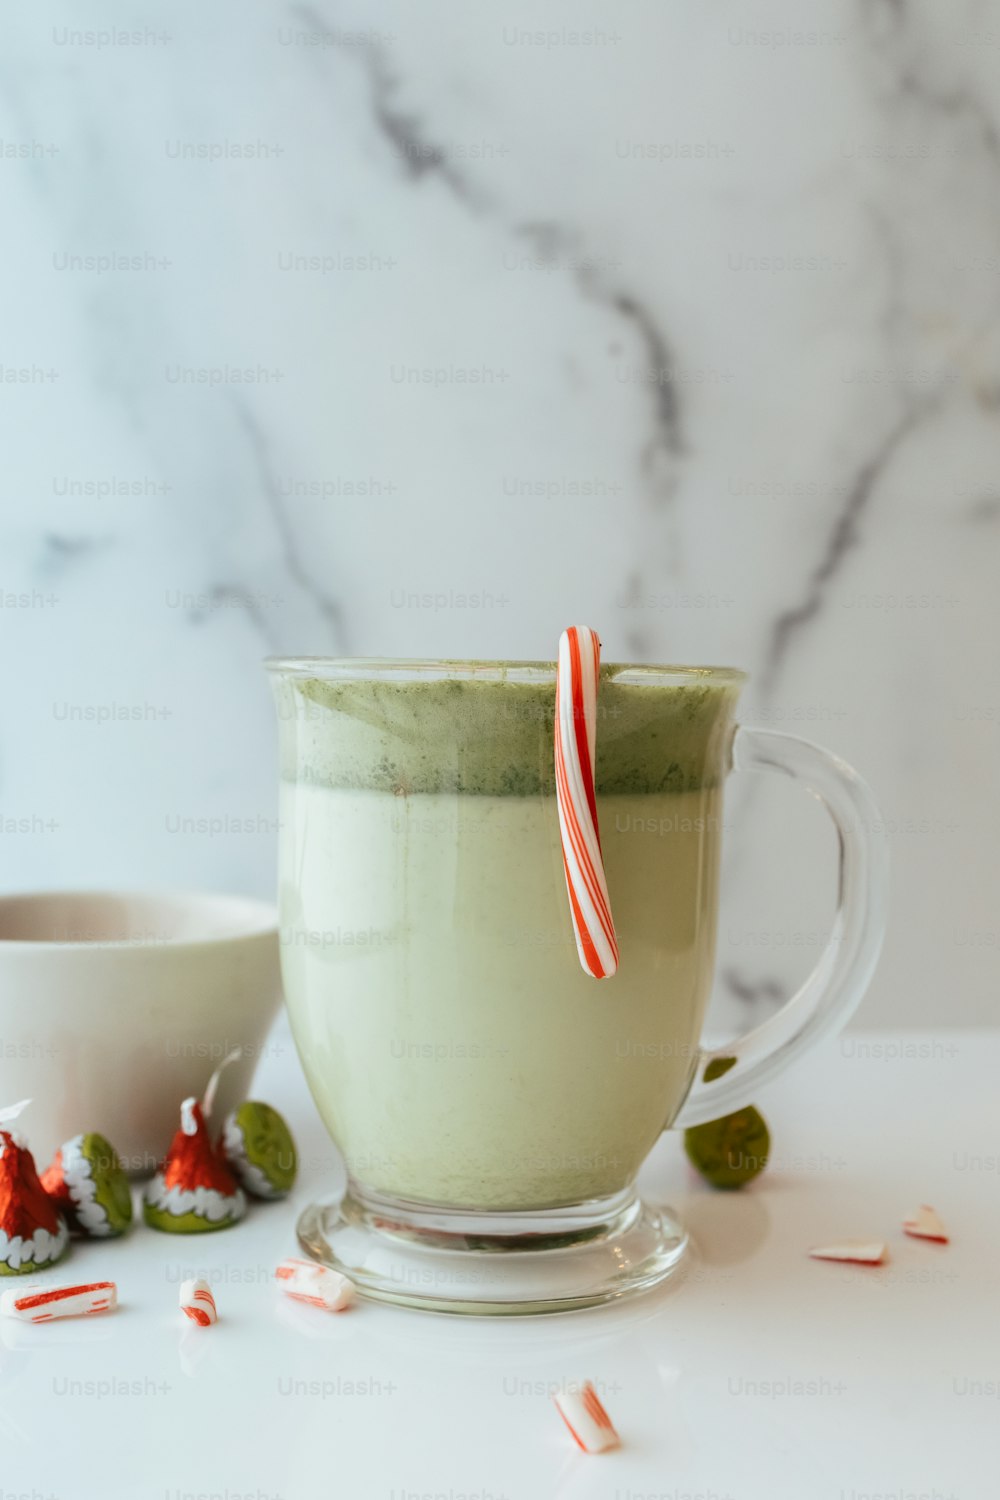 a cup of green tea with a candy cane sticking out of it